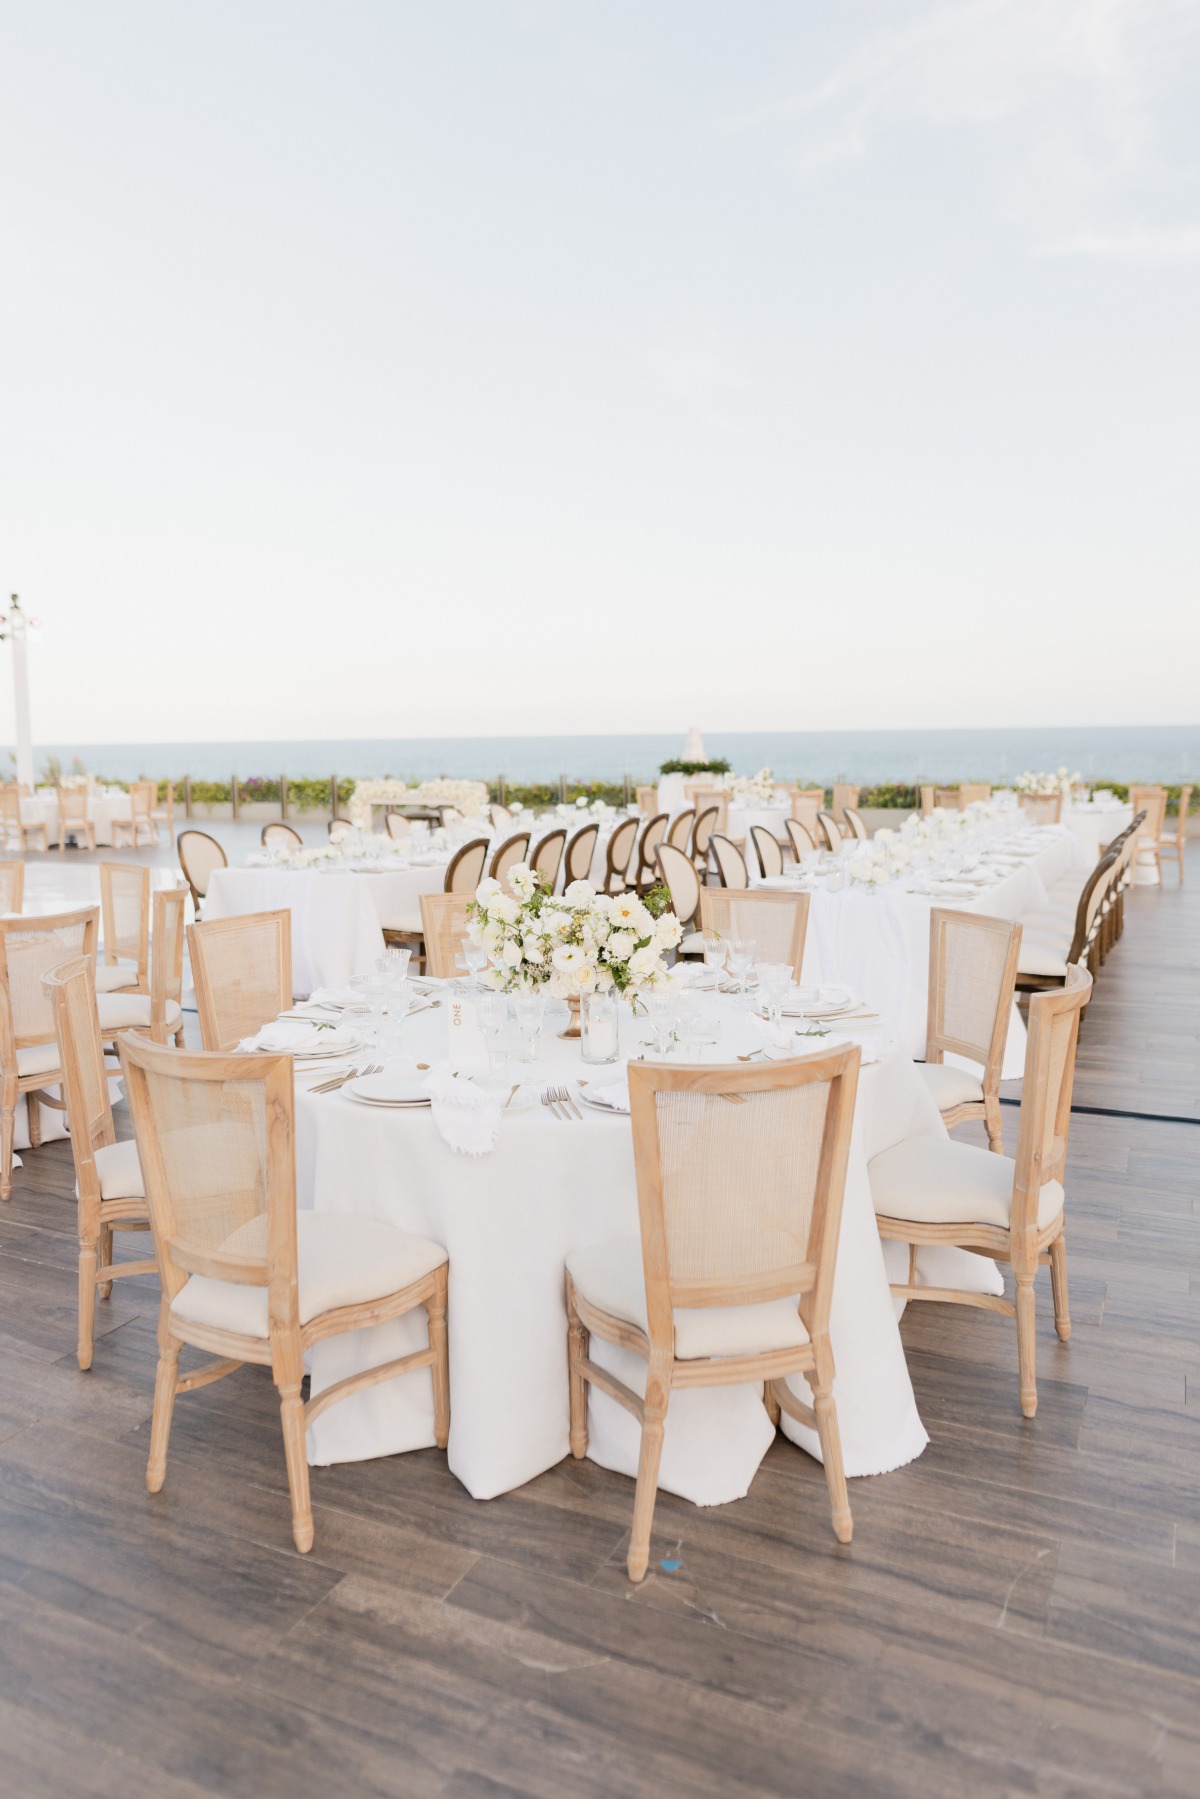 Styling long wedding reception tables